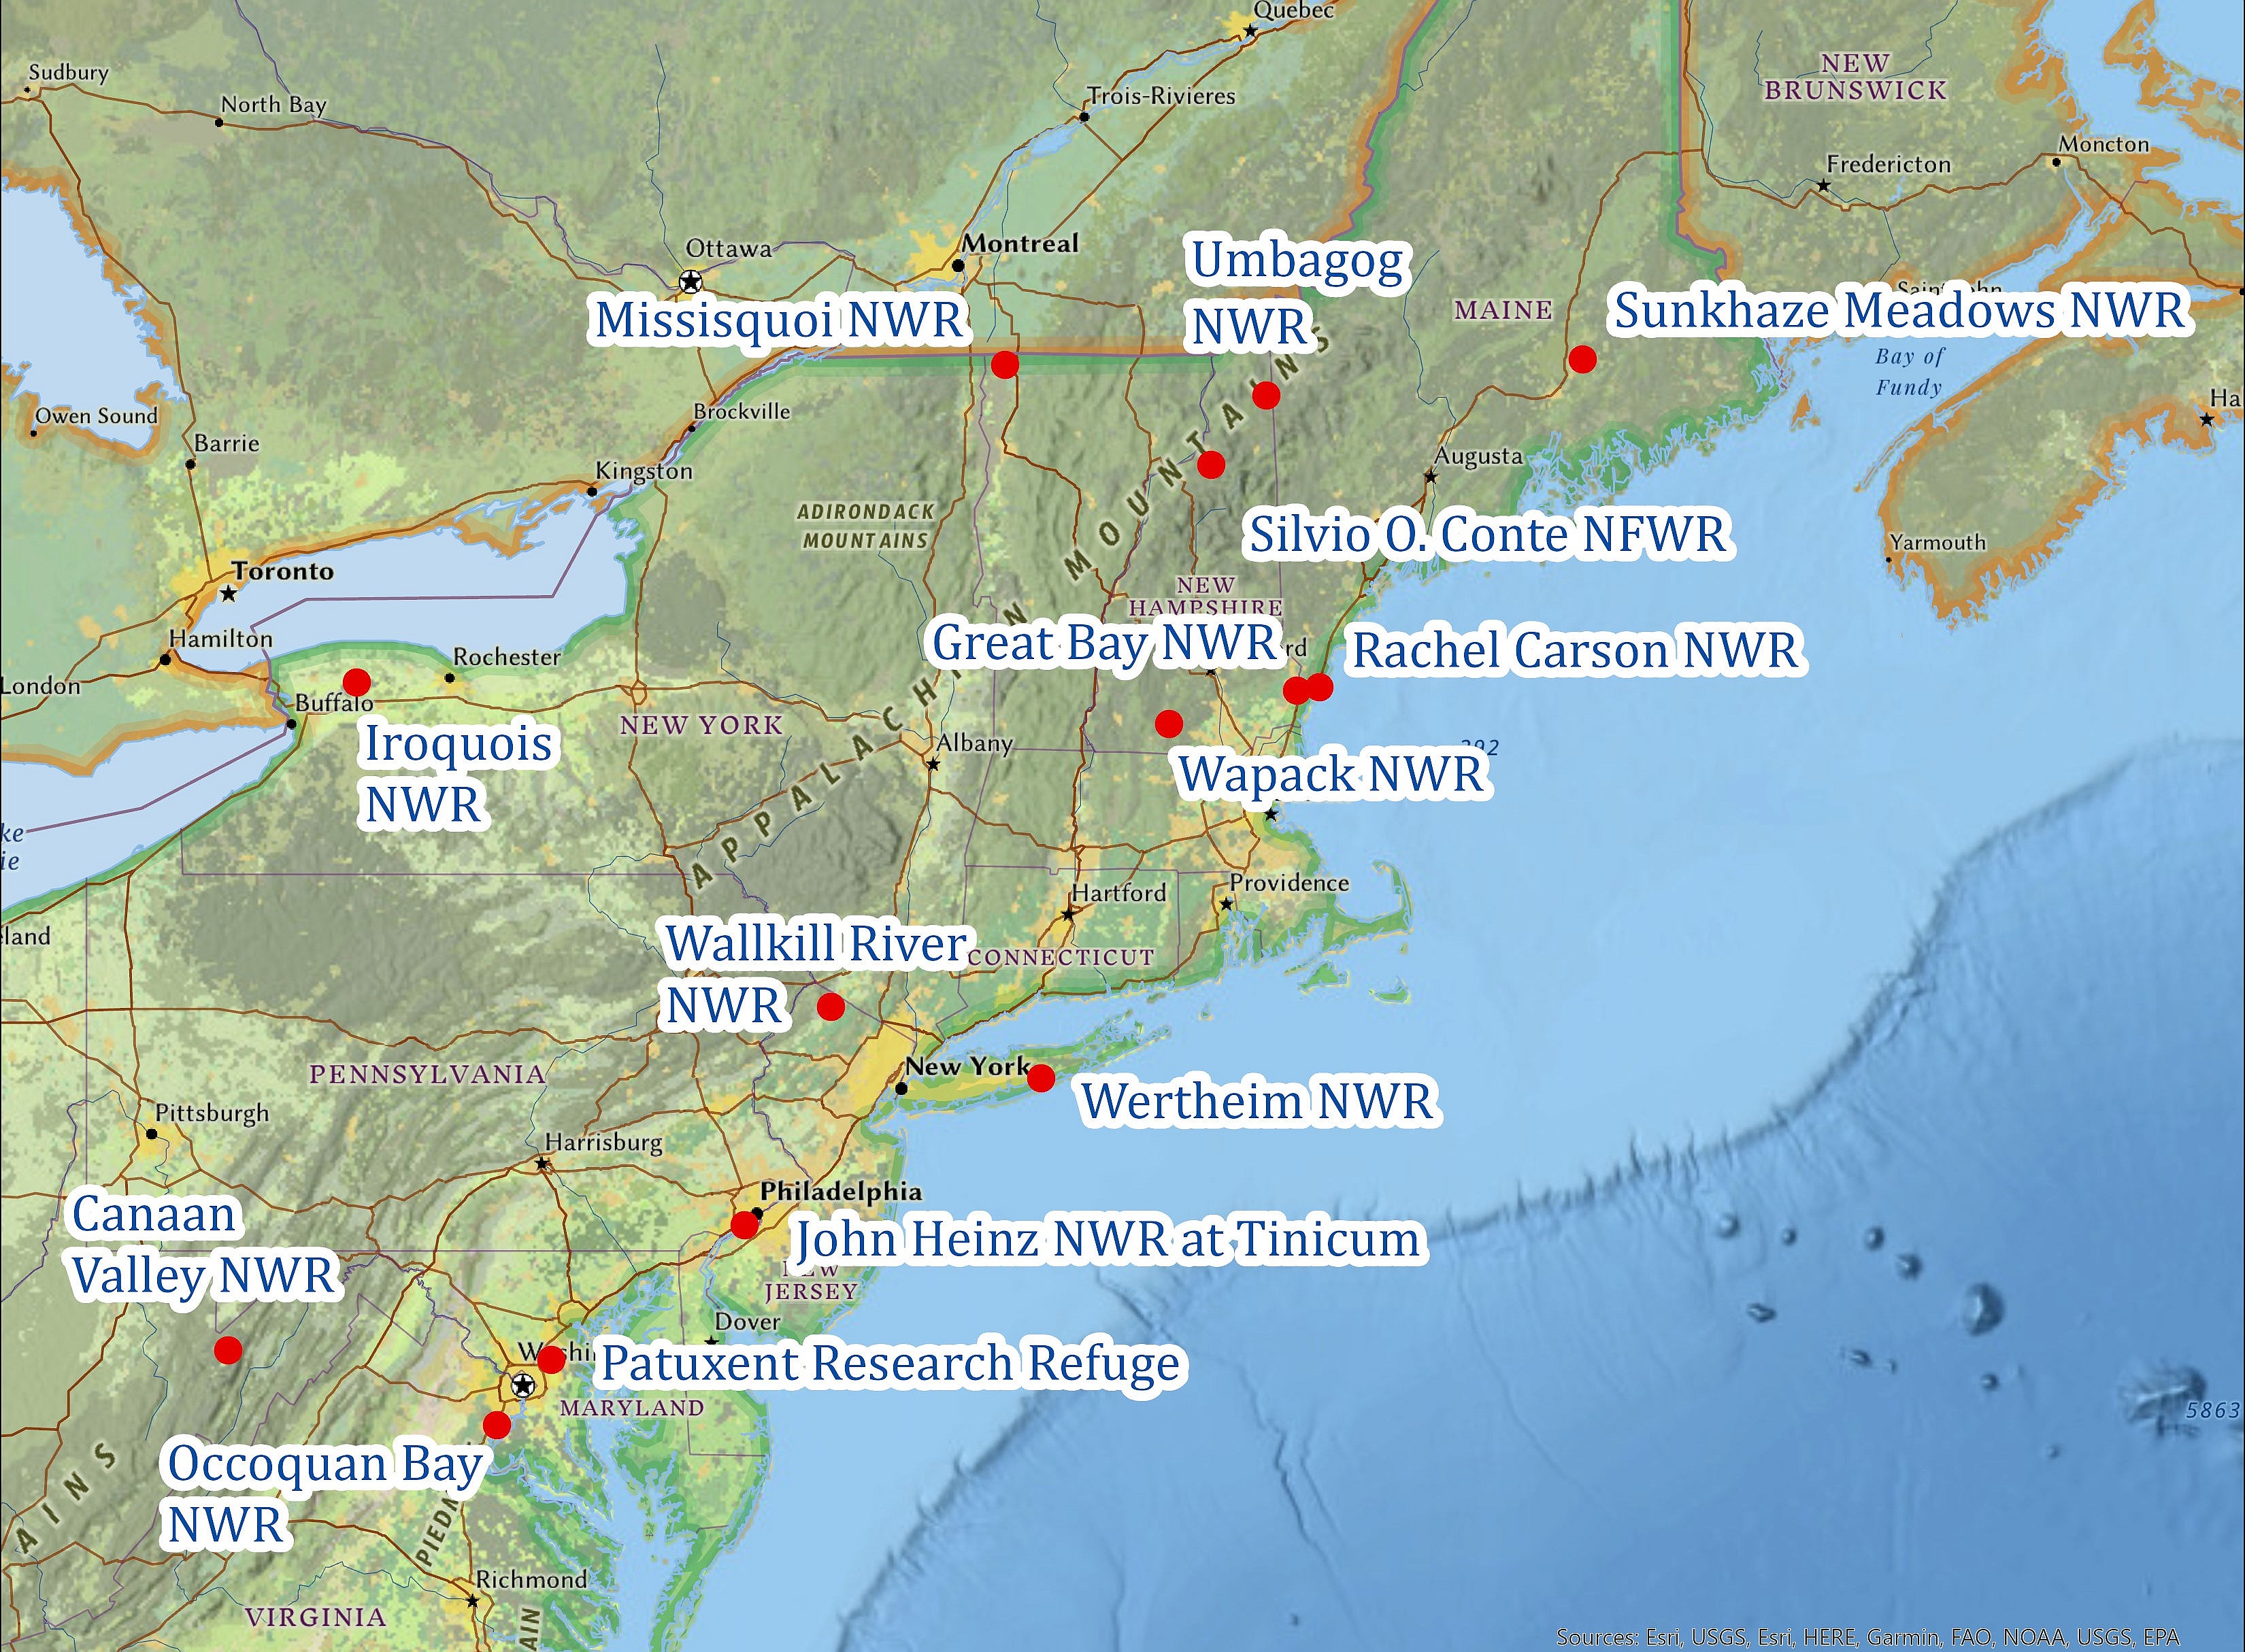 A map of the Northeastern United States showing the location of 14 national wildlife refuges